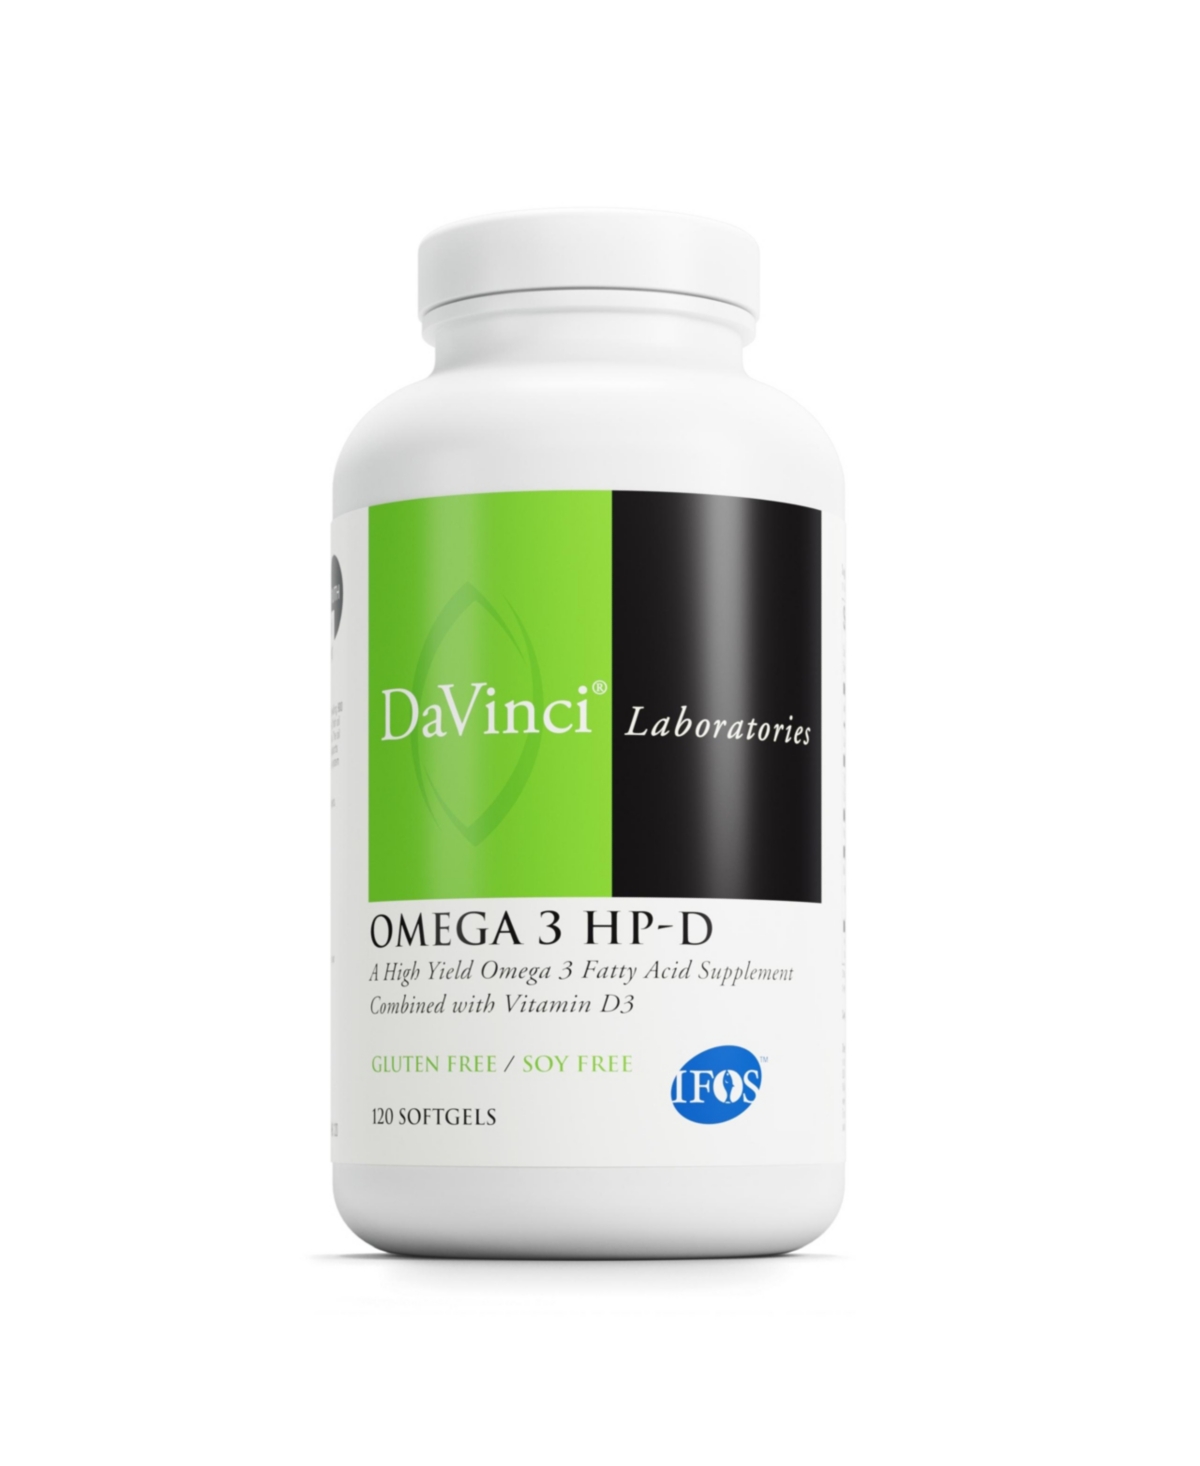 DaVinci Labs Omega 3 Hp-d - Dietary Supplement for Healthy Joints and Immune, Cardiovascular and Skin Health Support - With Vitamin D3 and More- Glute